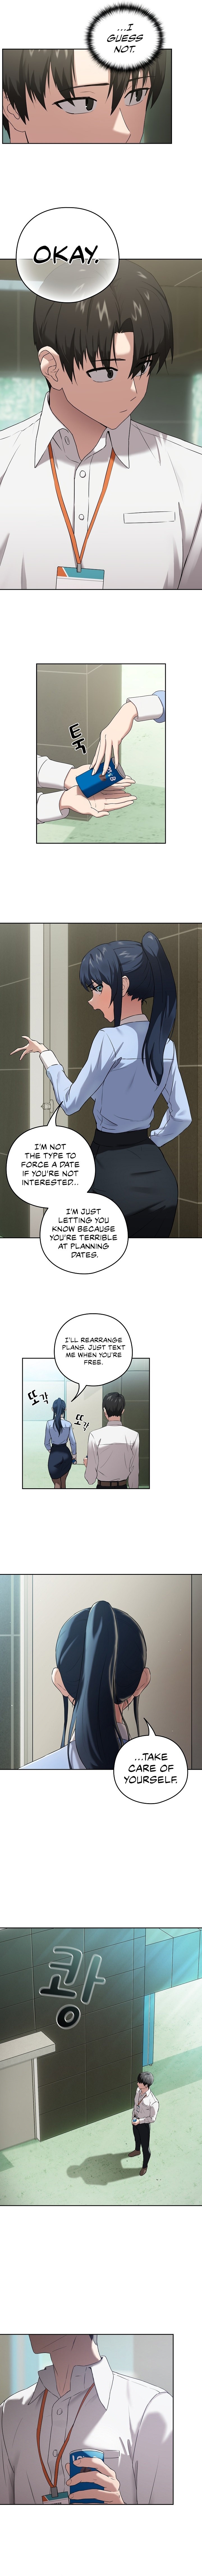 After Work Love Affairs - Chapter 3 Page 8